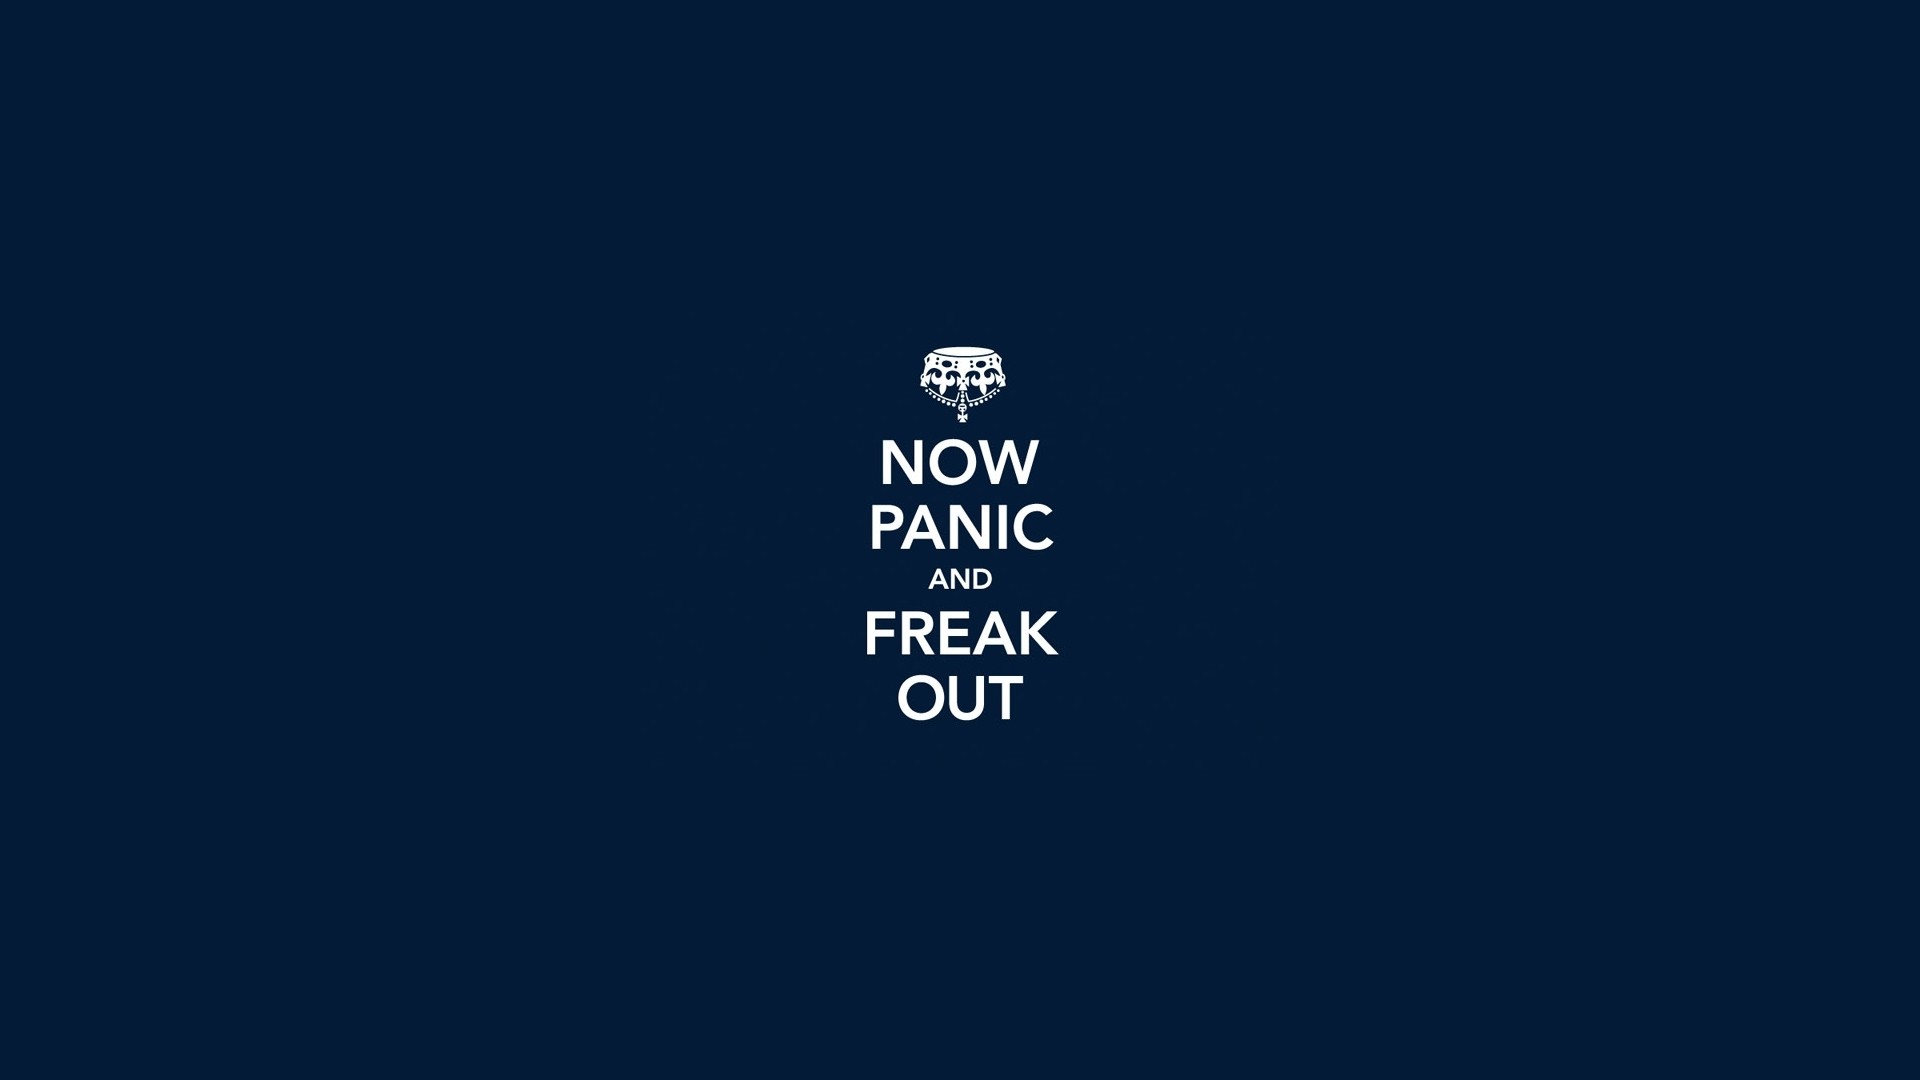 Keep Calm And Carry On Wallpaper Now Panic Freak Out Humor Funny